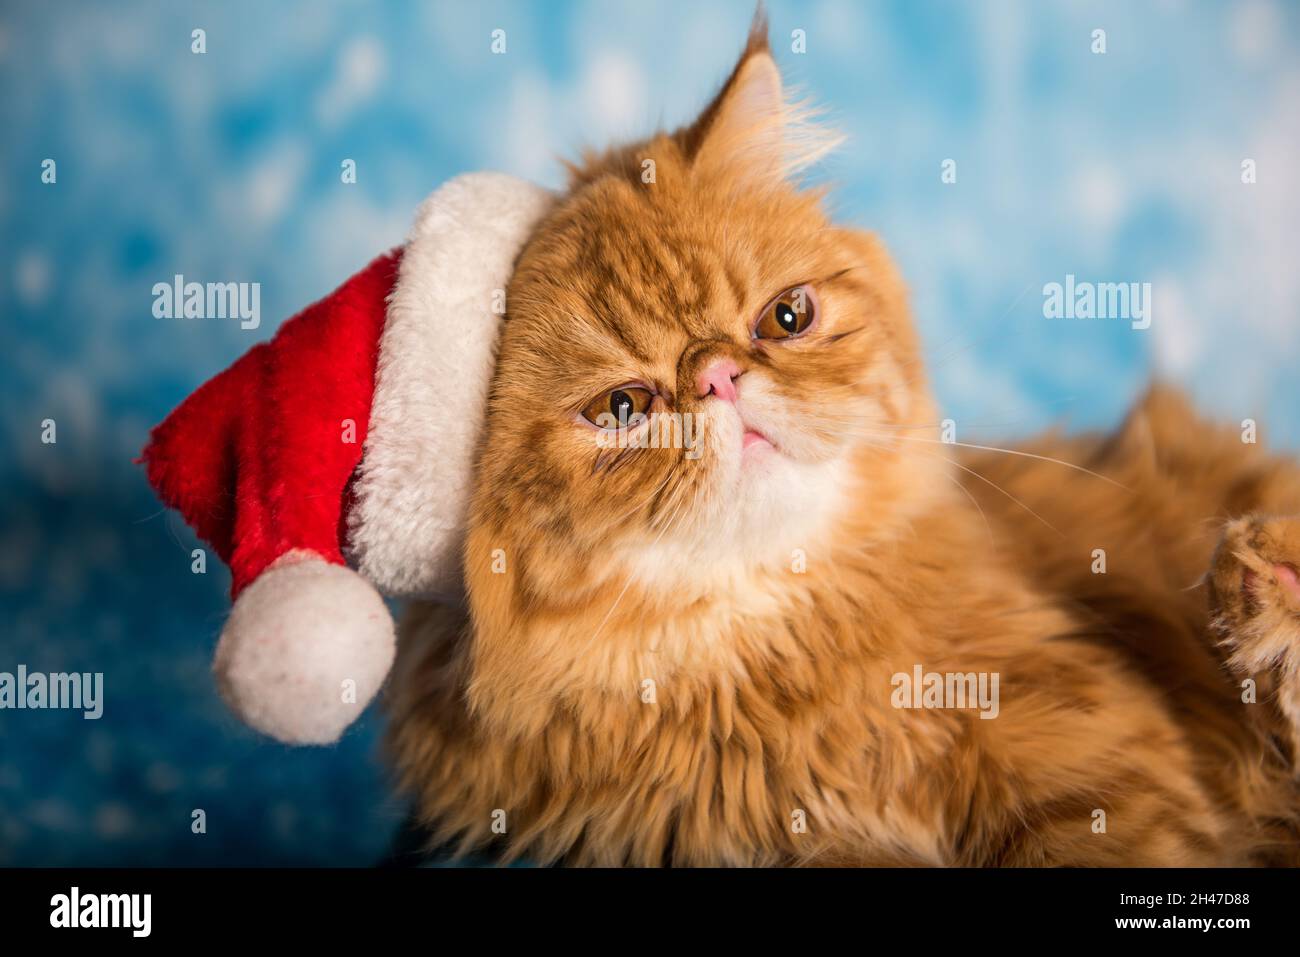 Angry cat in red Santa Claus hat on Christmas Stock Photo